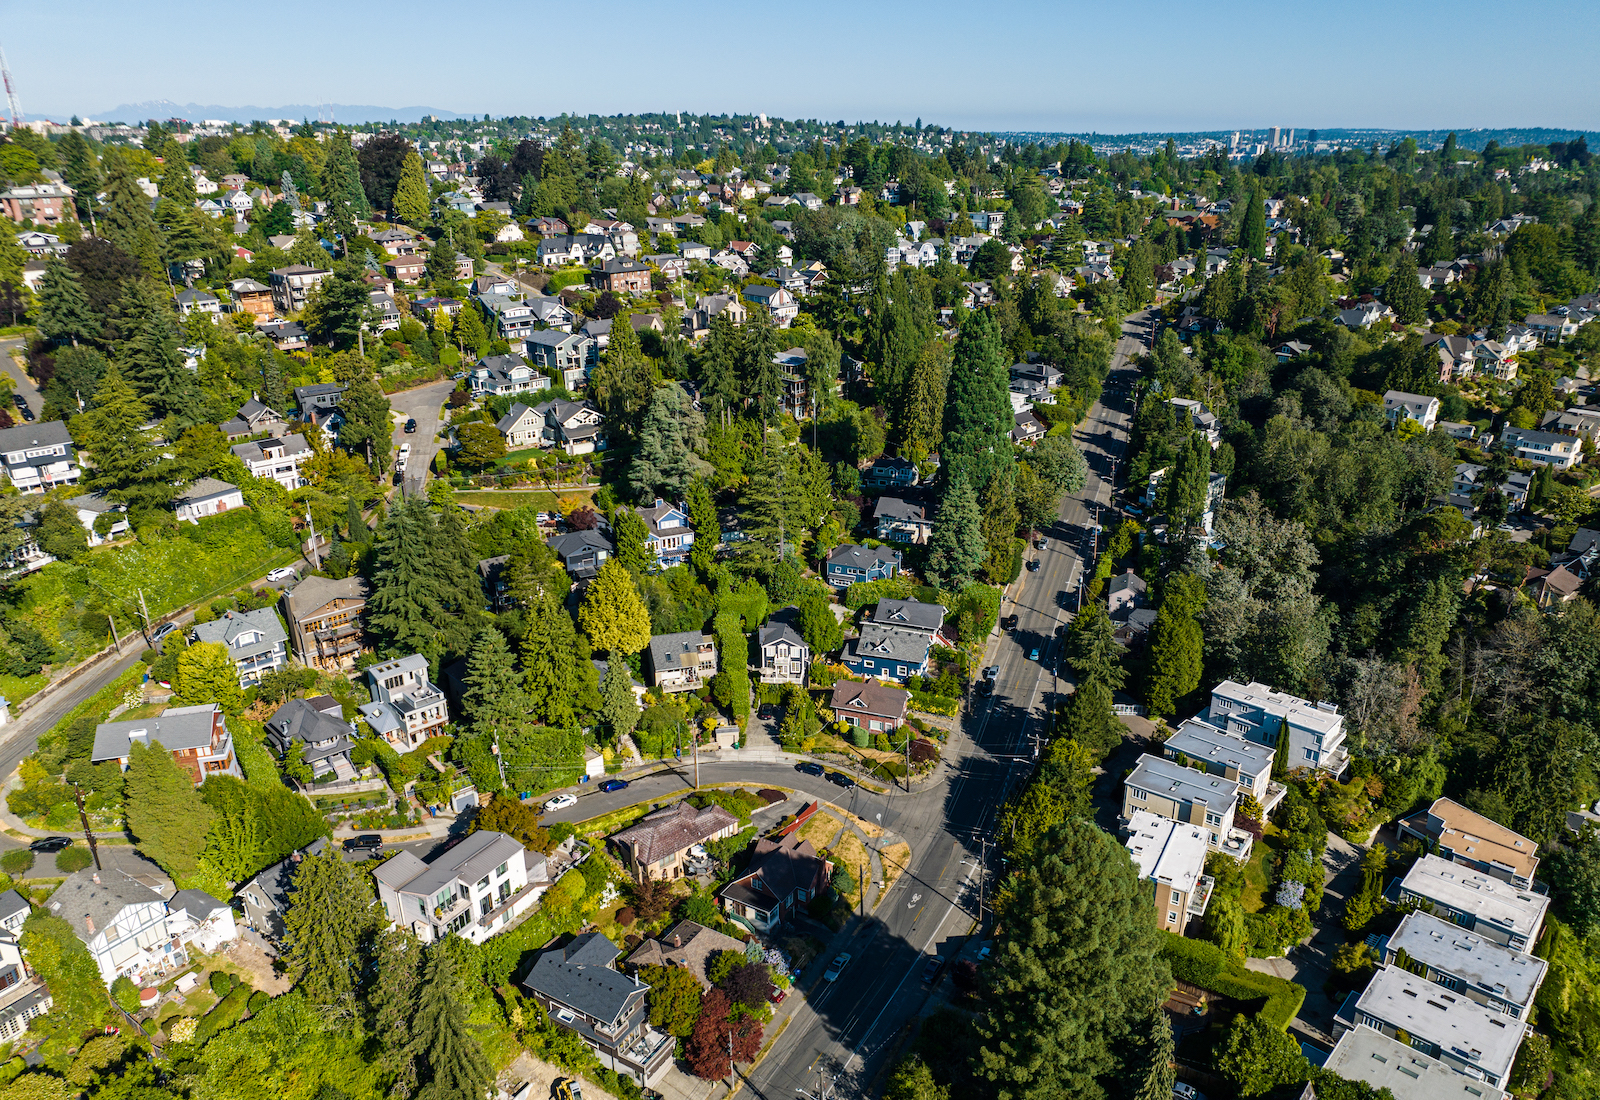 Aerial view of a tree-filled neighborhood